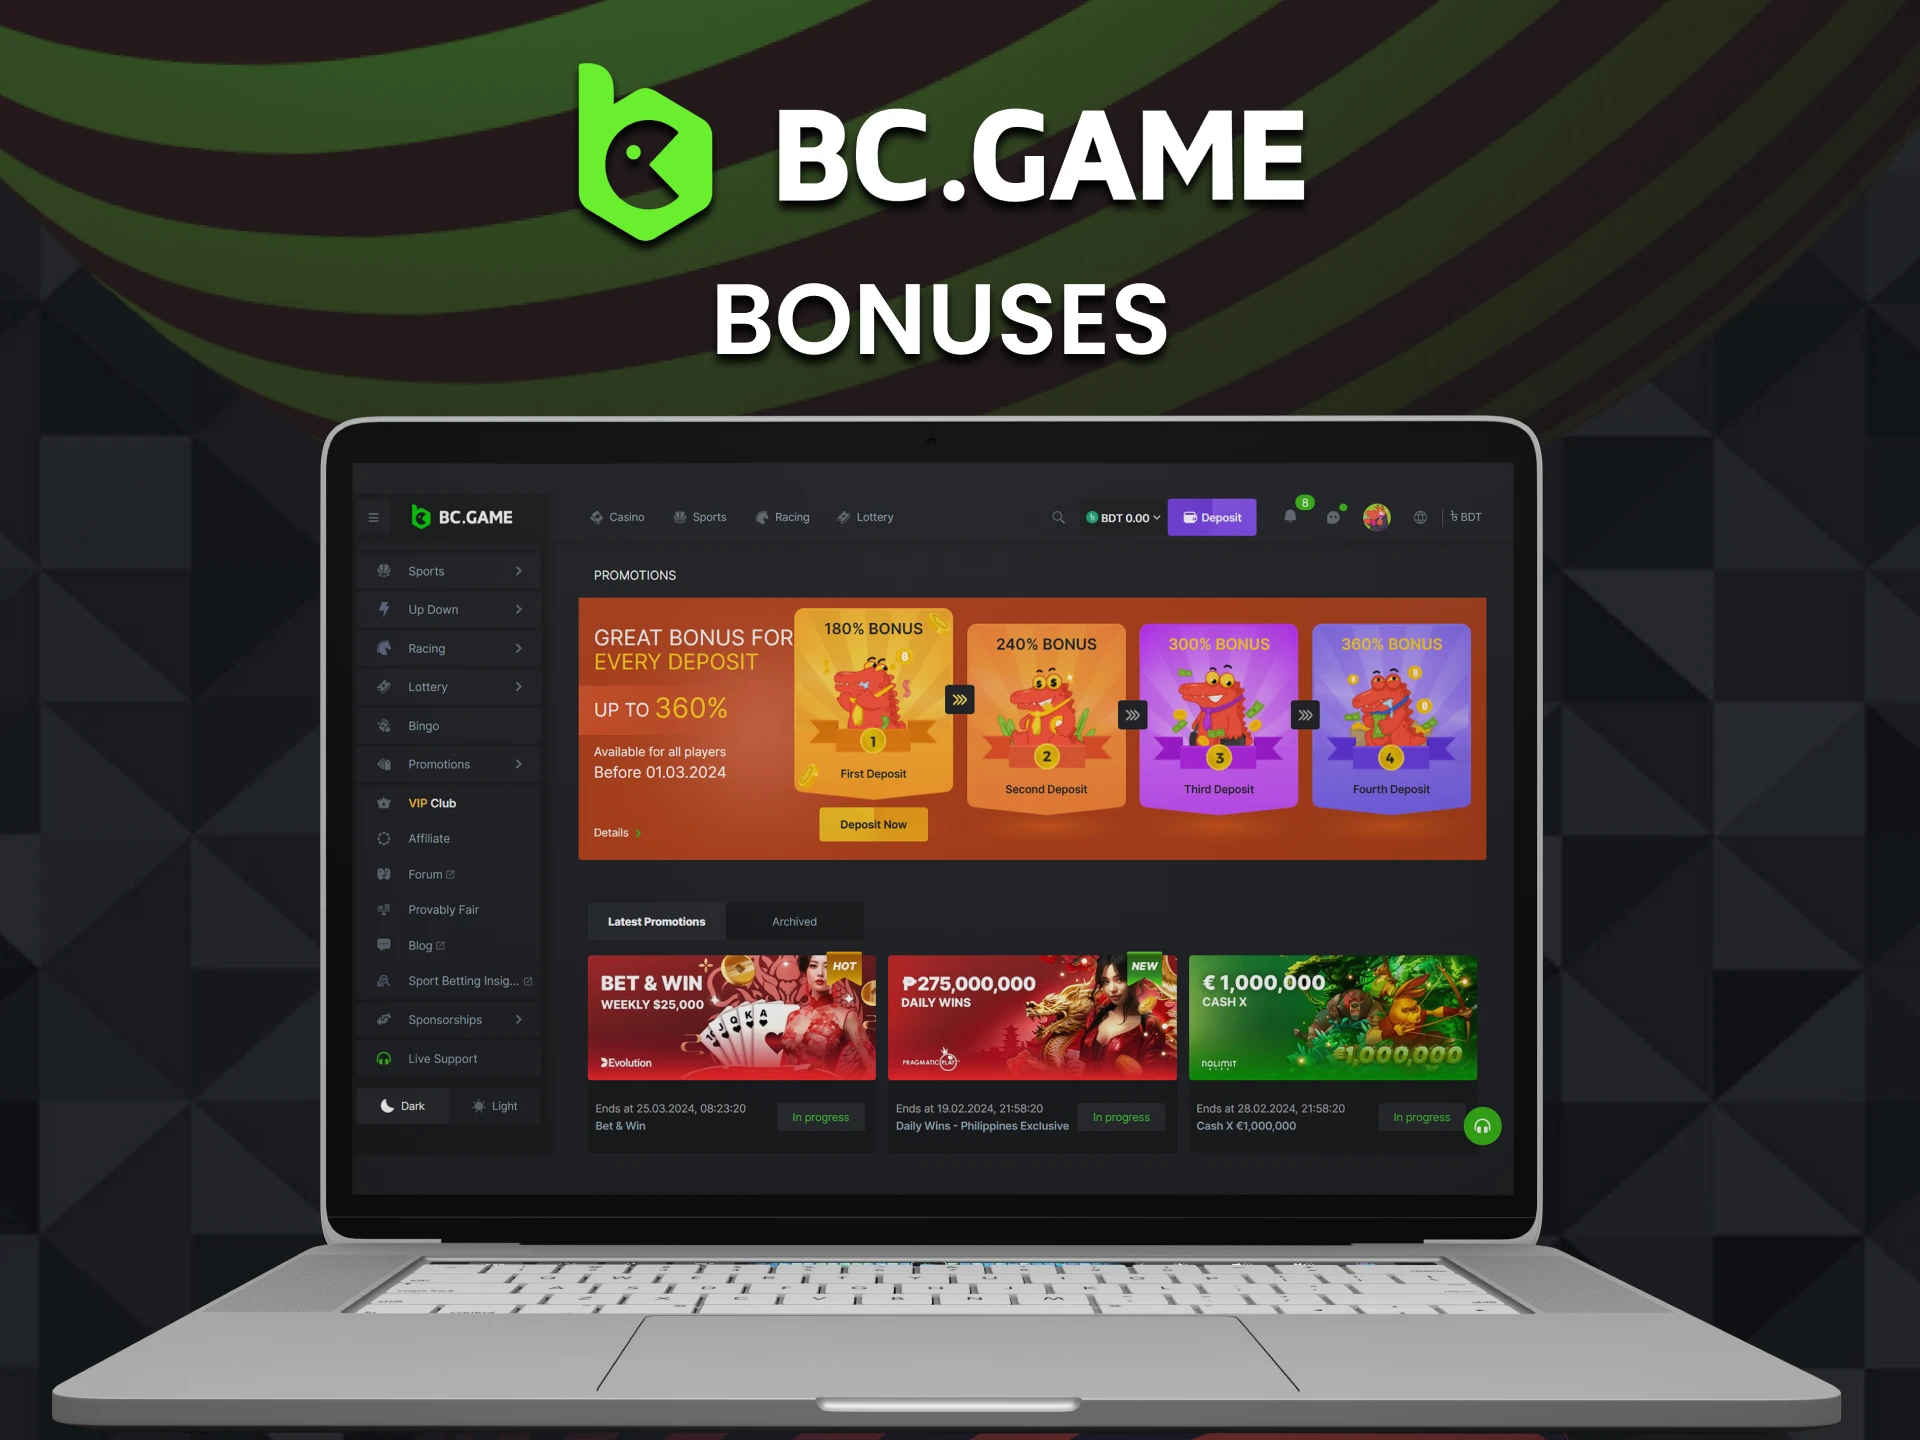 BC Game offers bonuses for new and existing players.